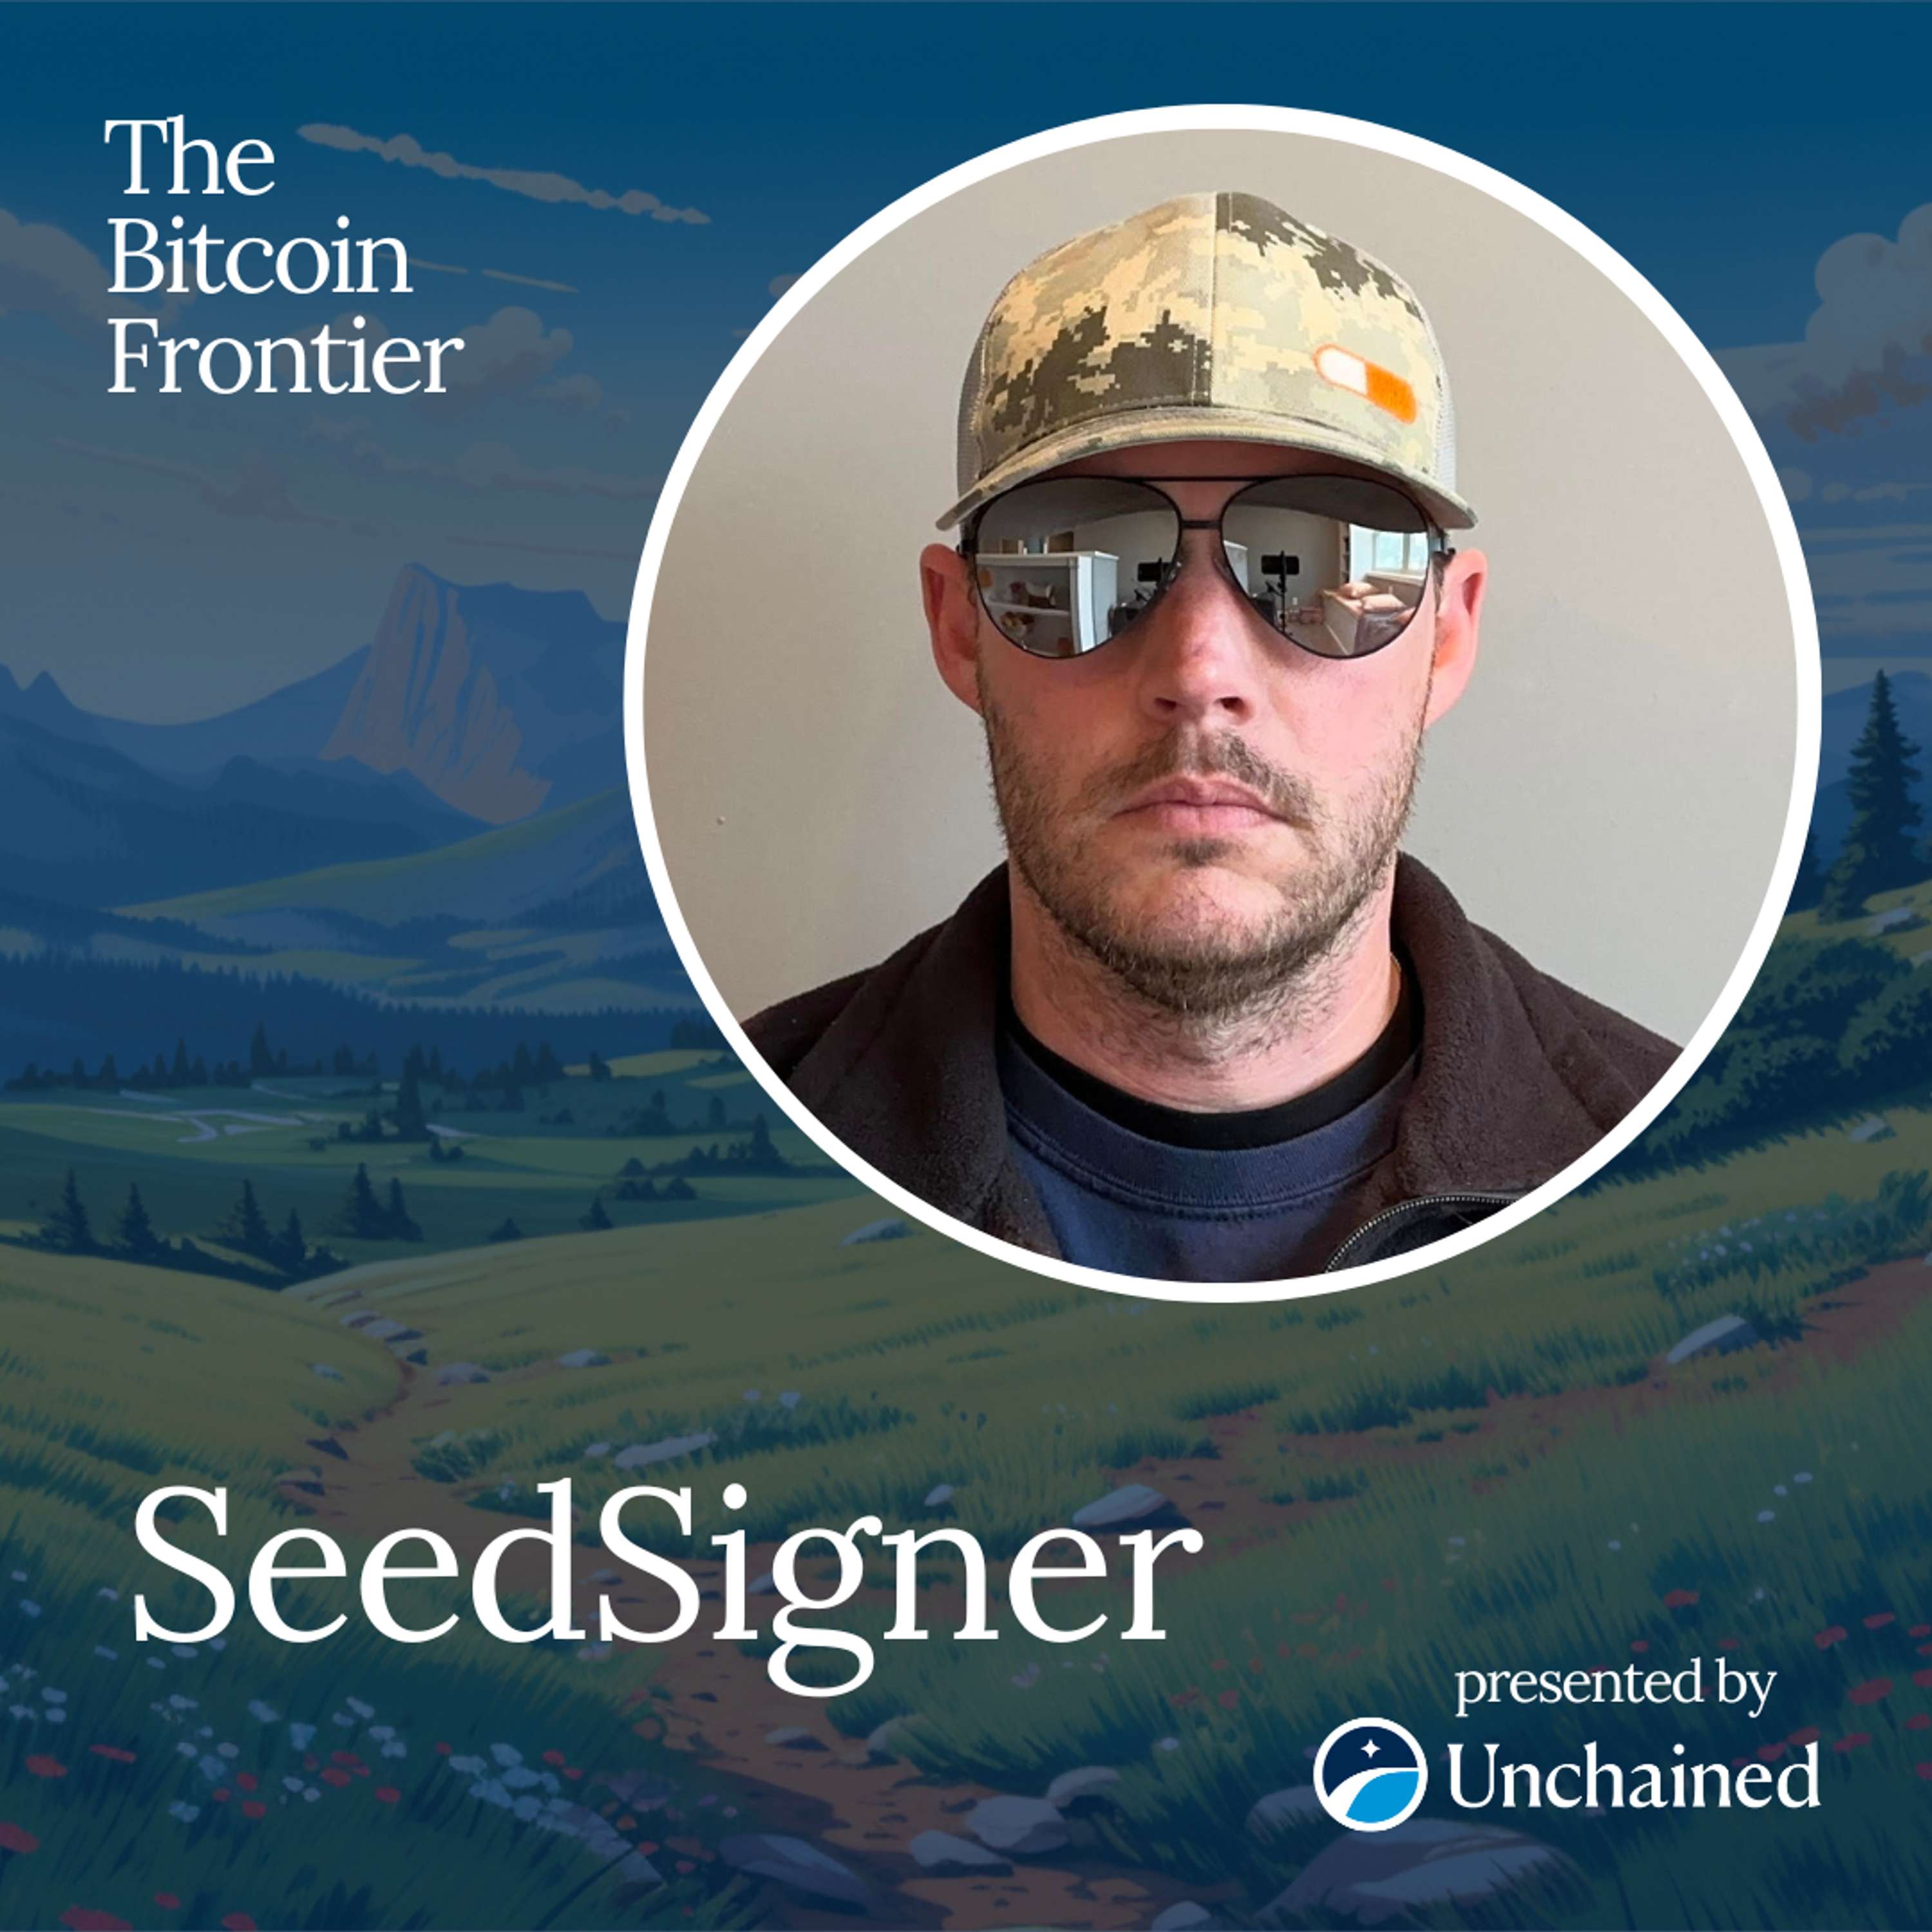 Is it insecure to use a SeedSigner to sign bitcoin transactions?